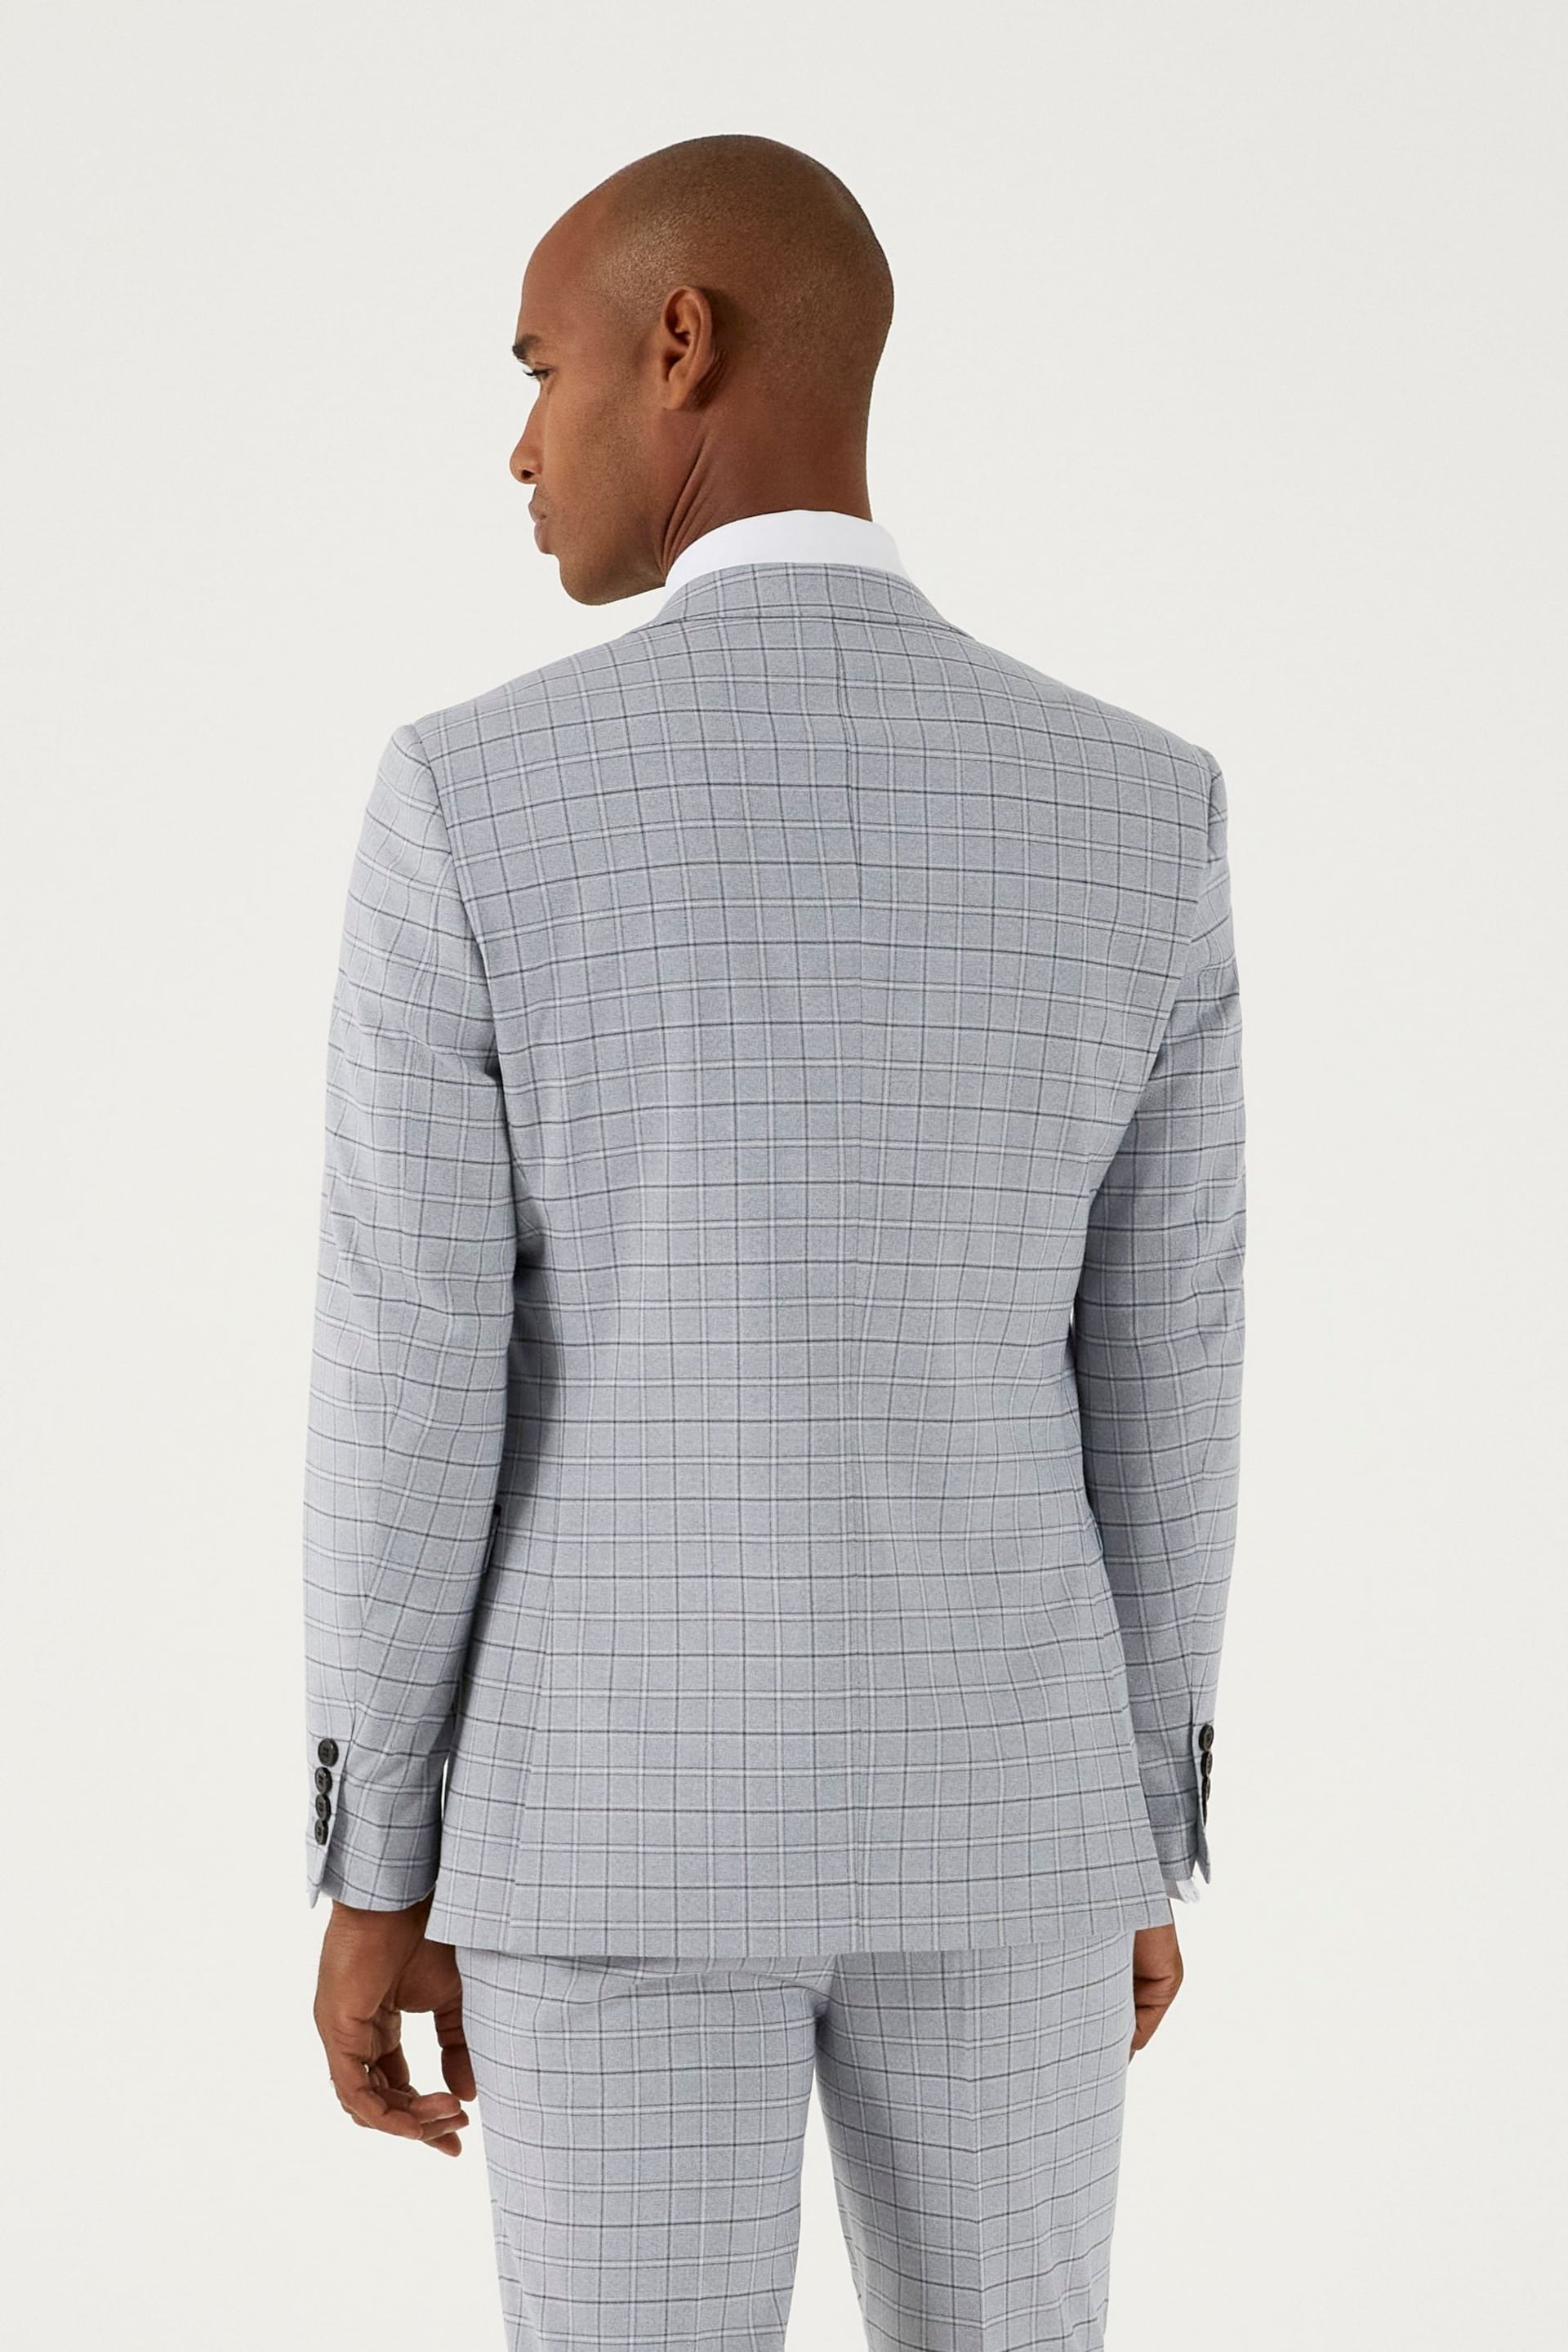 Skopes Brook Silver Grey Check Tailored Fit Suit Jacket - Image 2 of 4